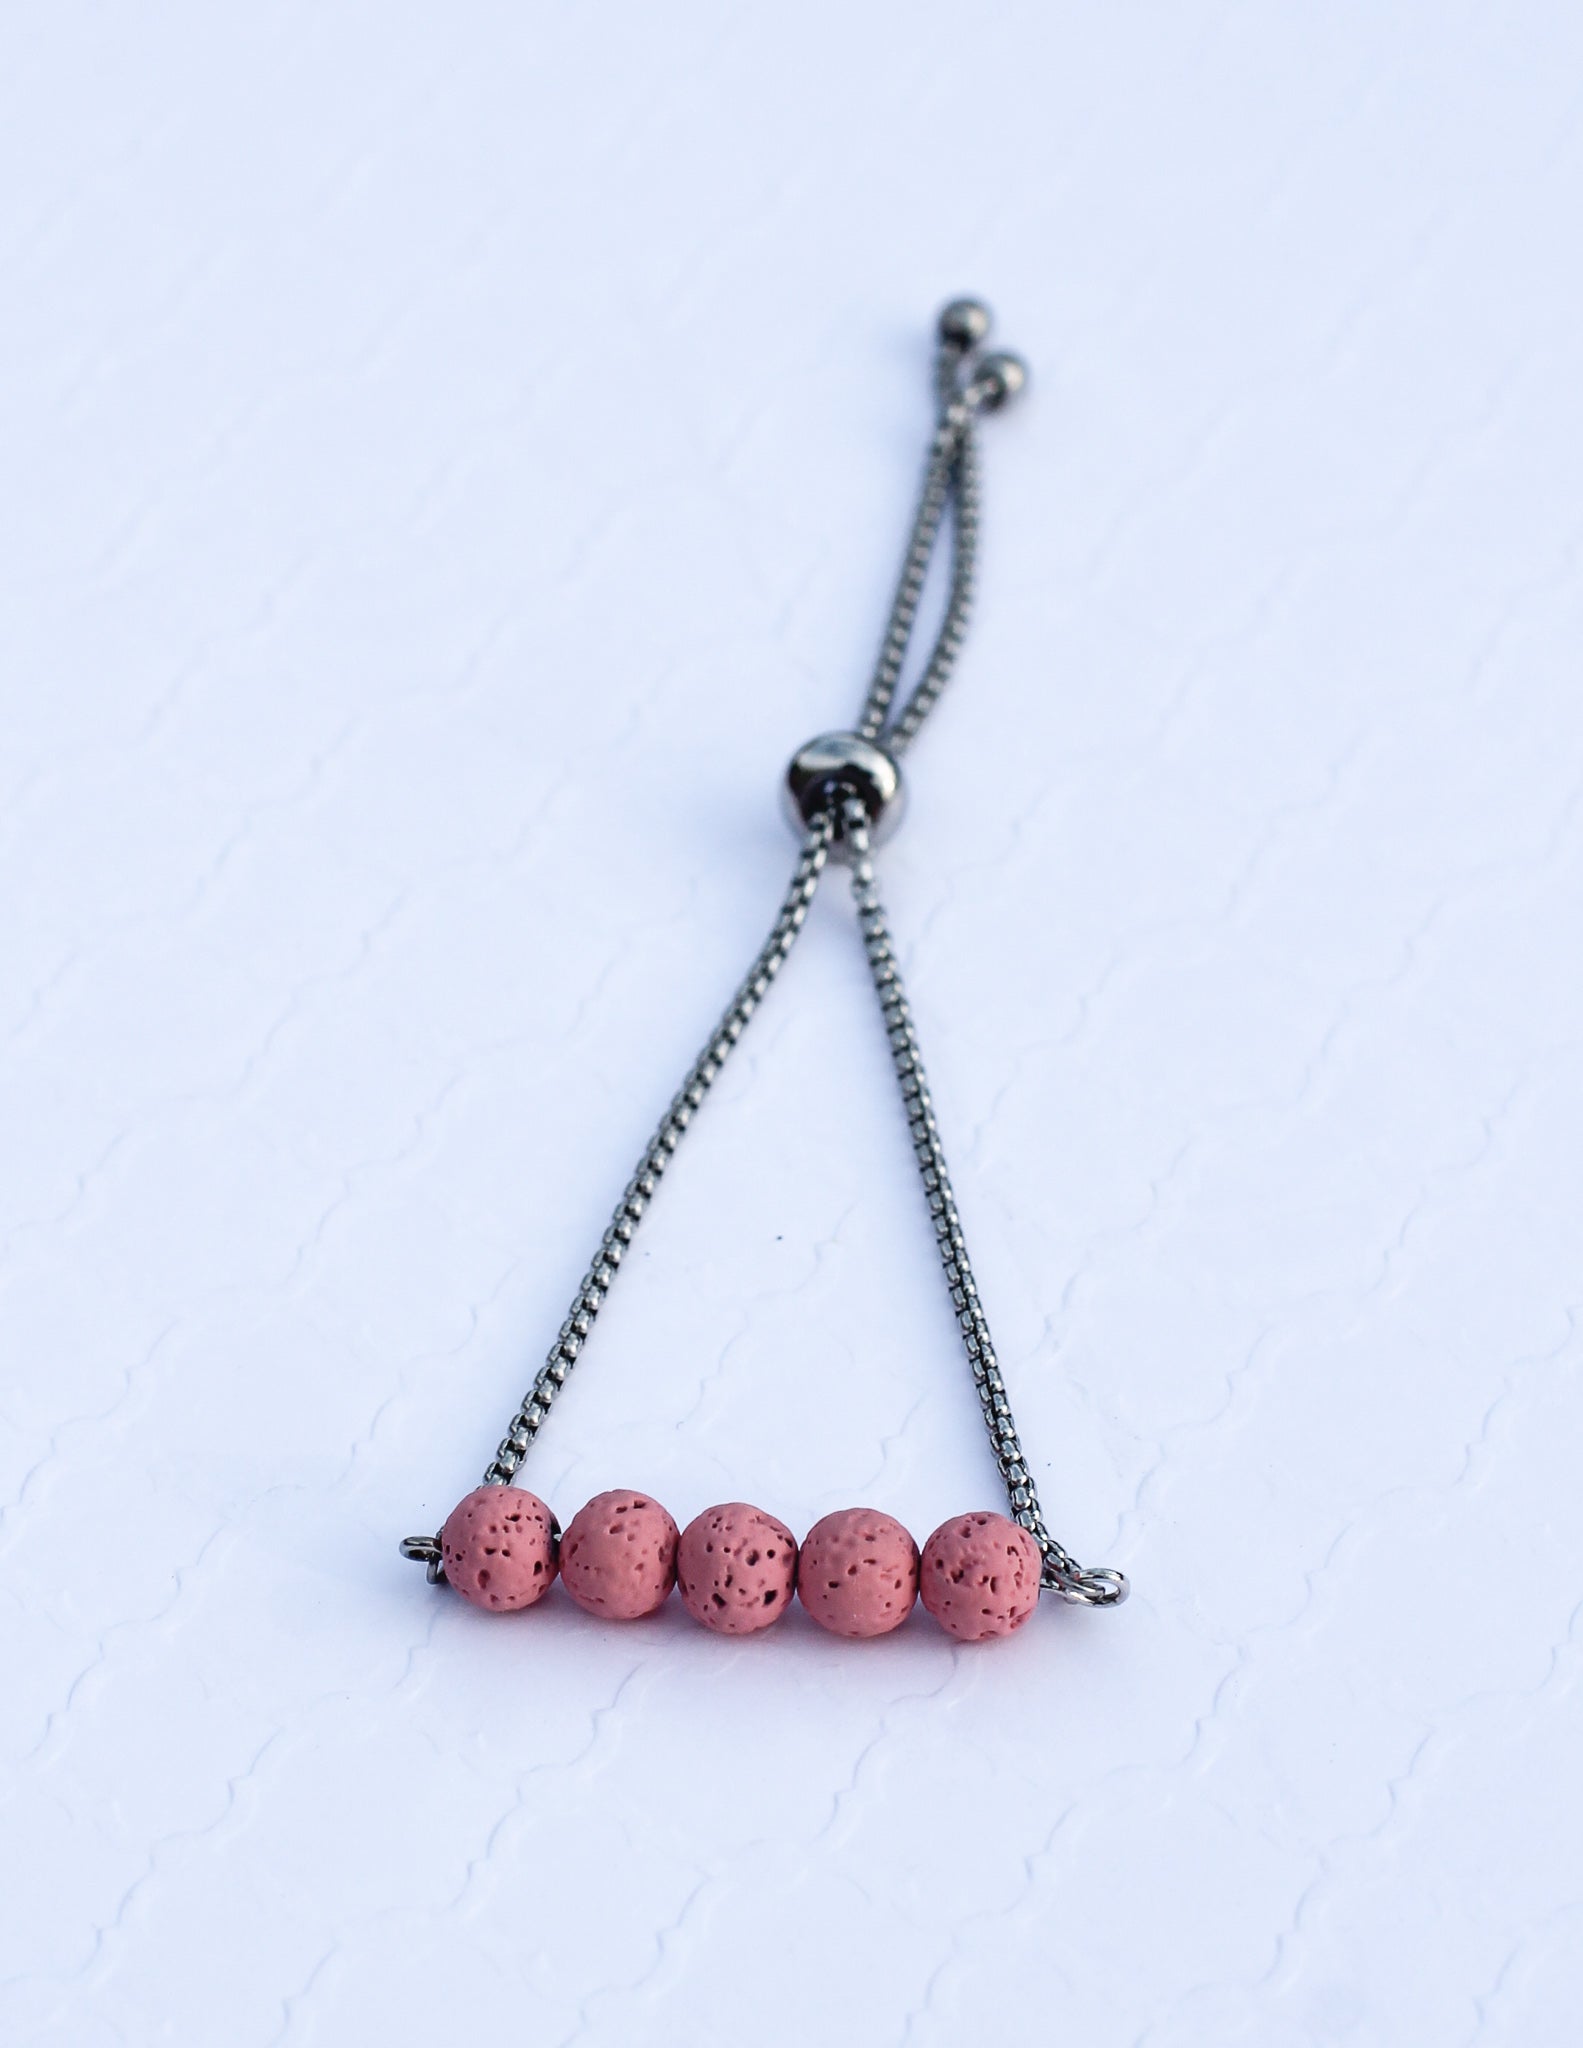 How To Make A Bead Bar Necklace